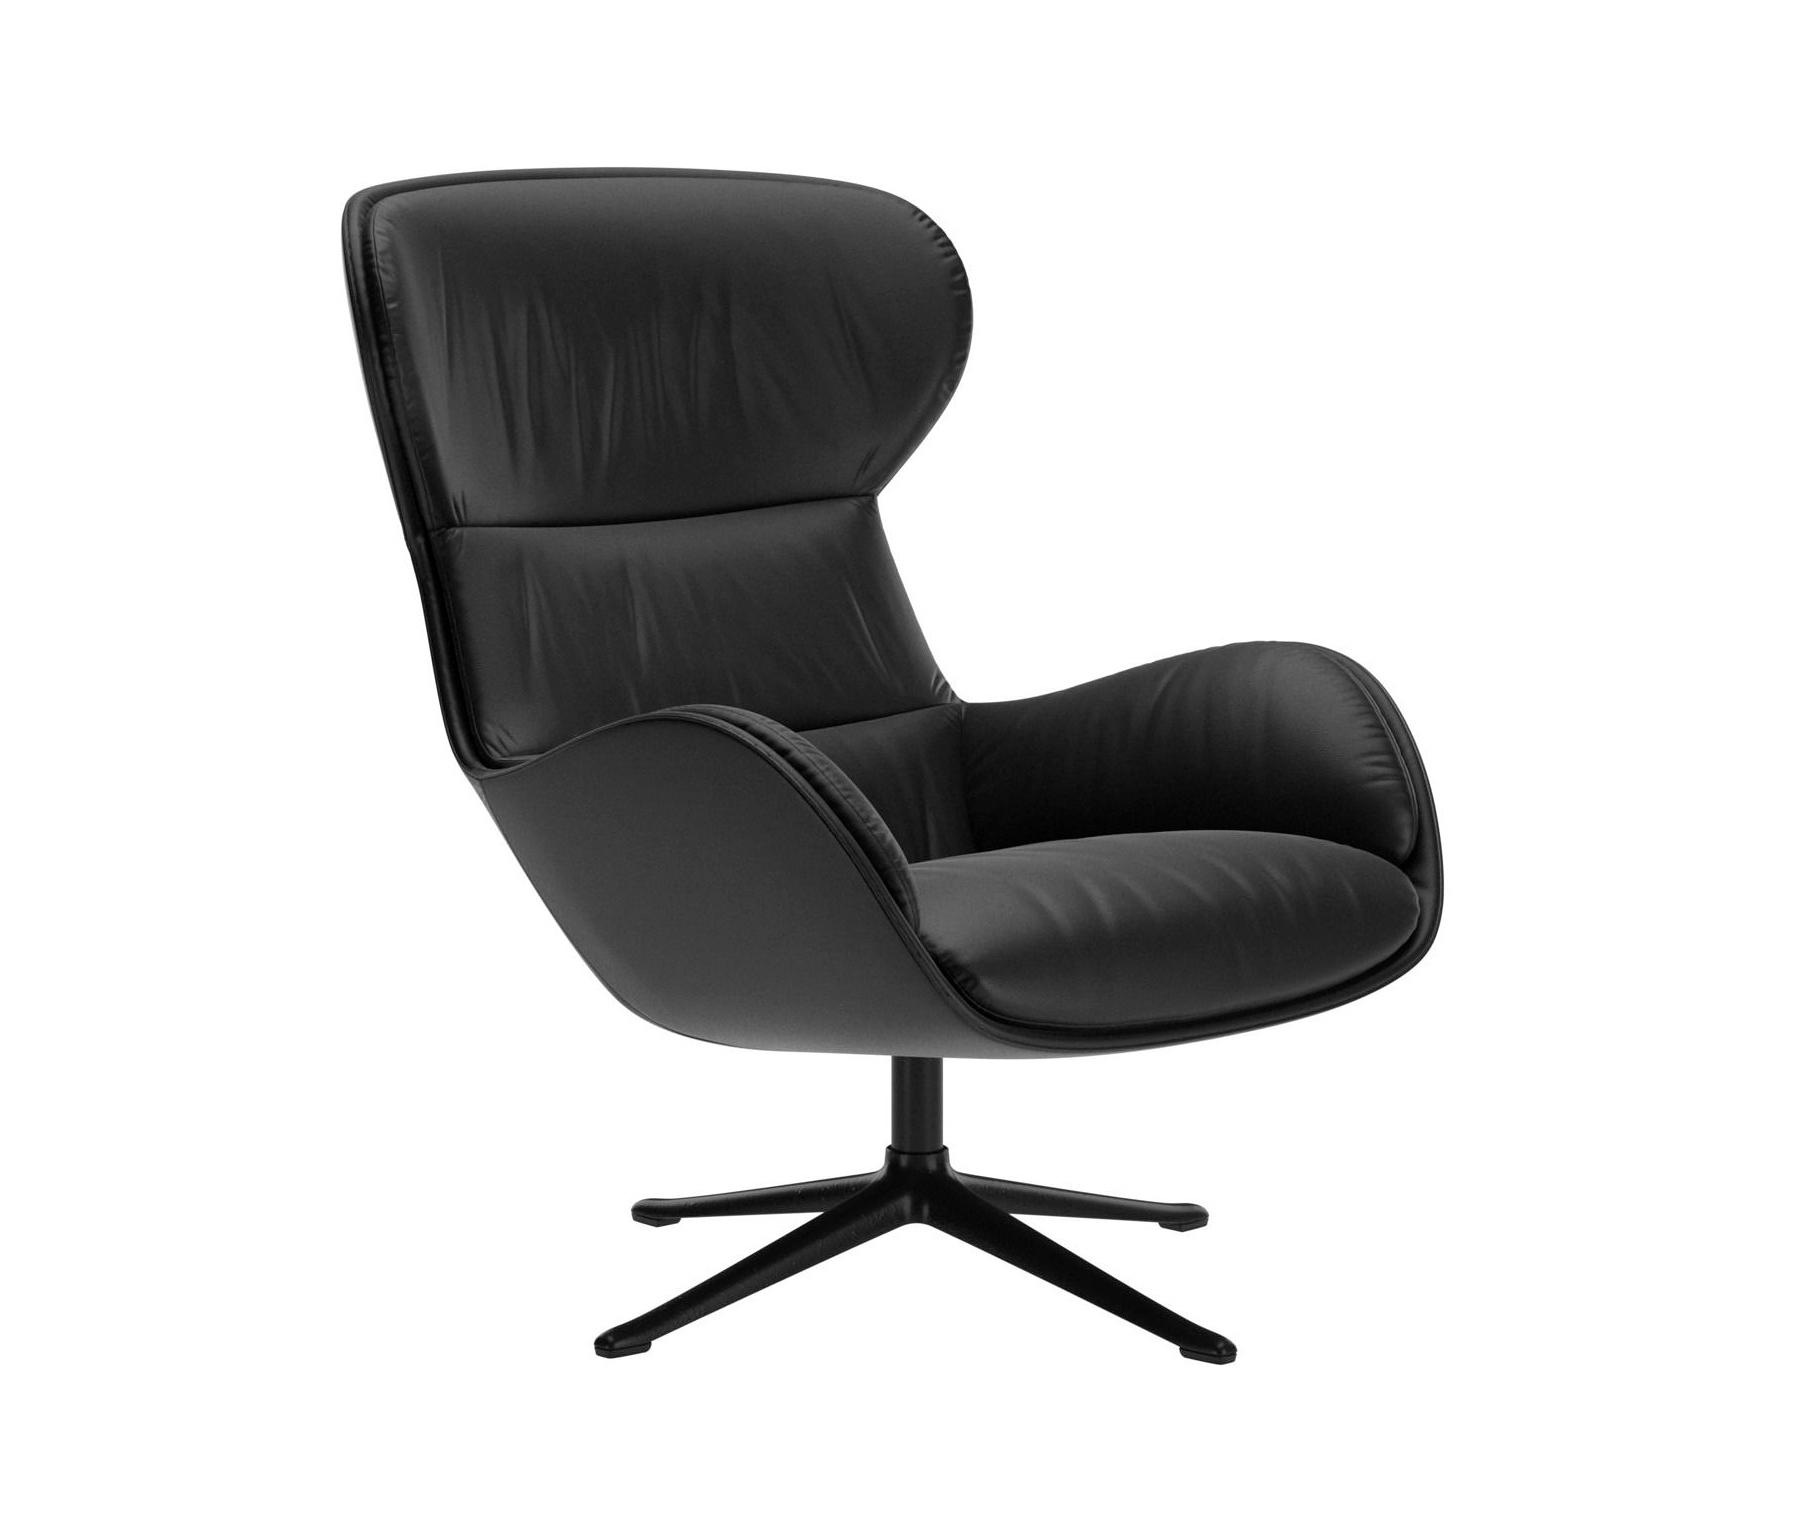 Reno Lounge Chair 1415 With Swivel Function Architonic